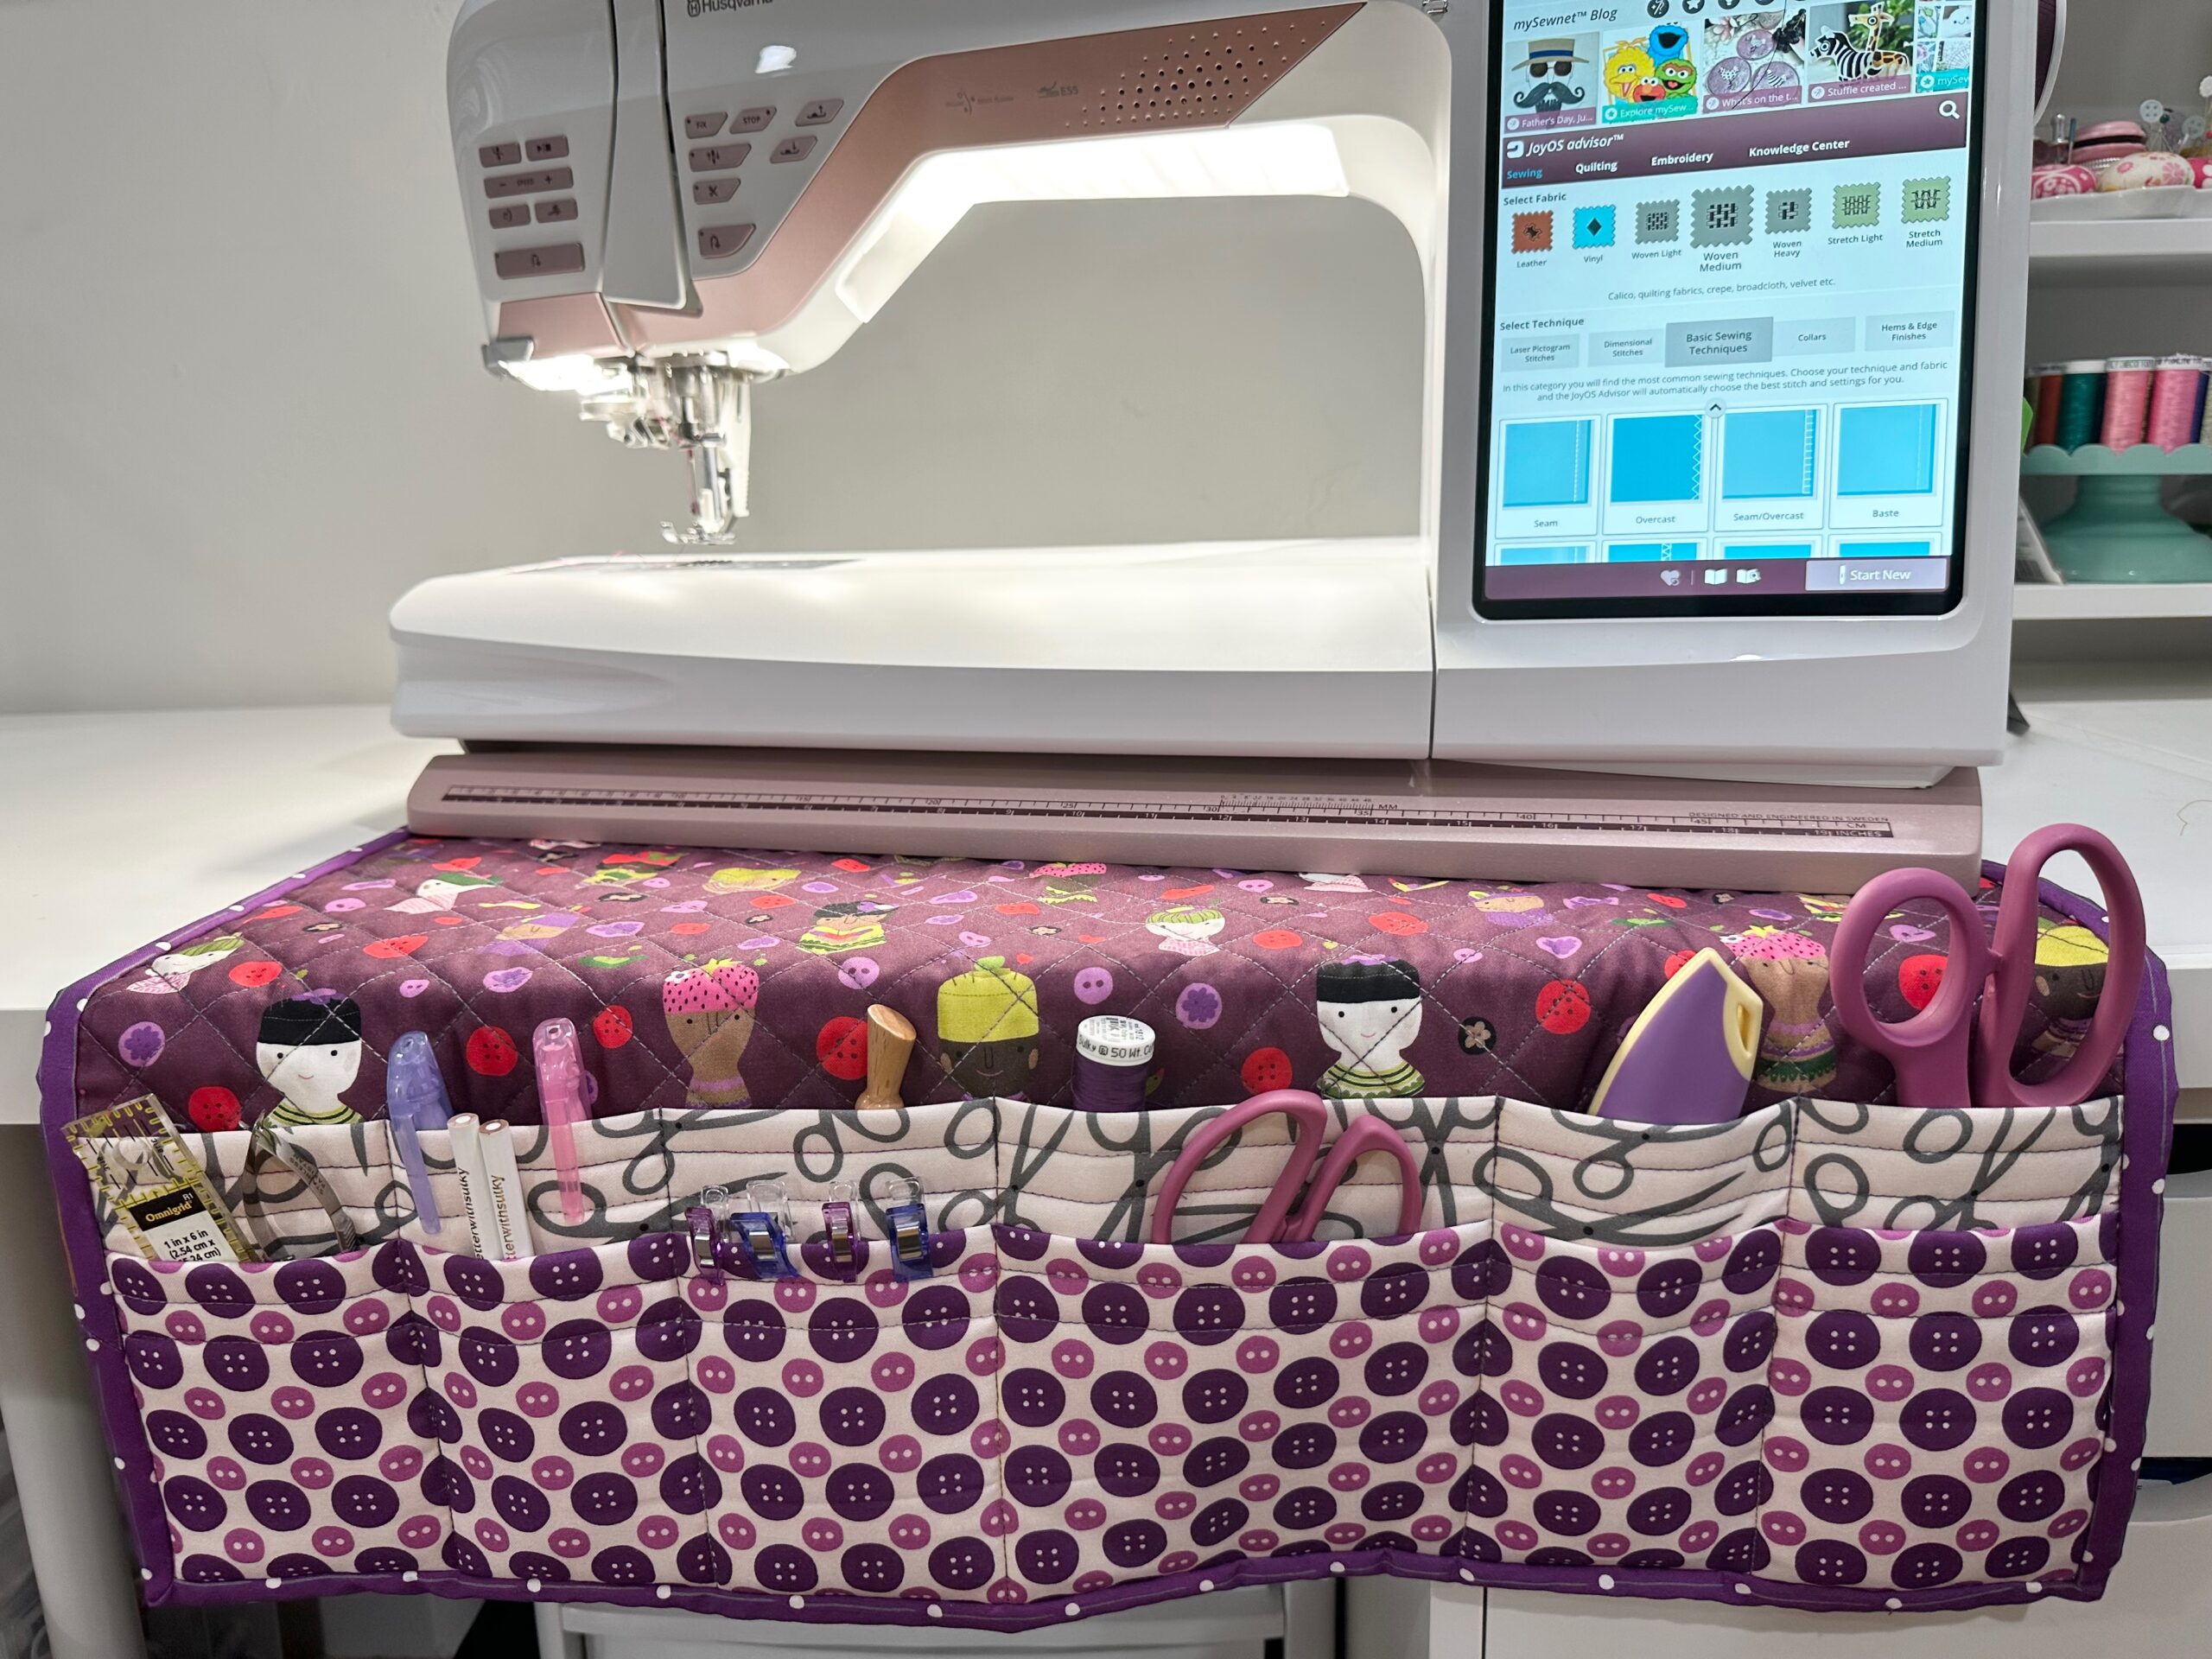 Sewing Machine Mat How To - The Sewing Loft